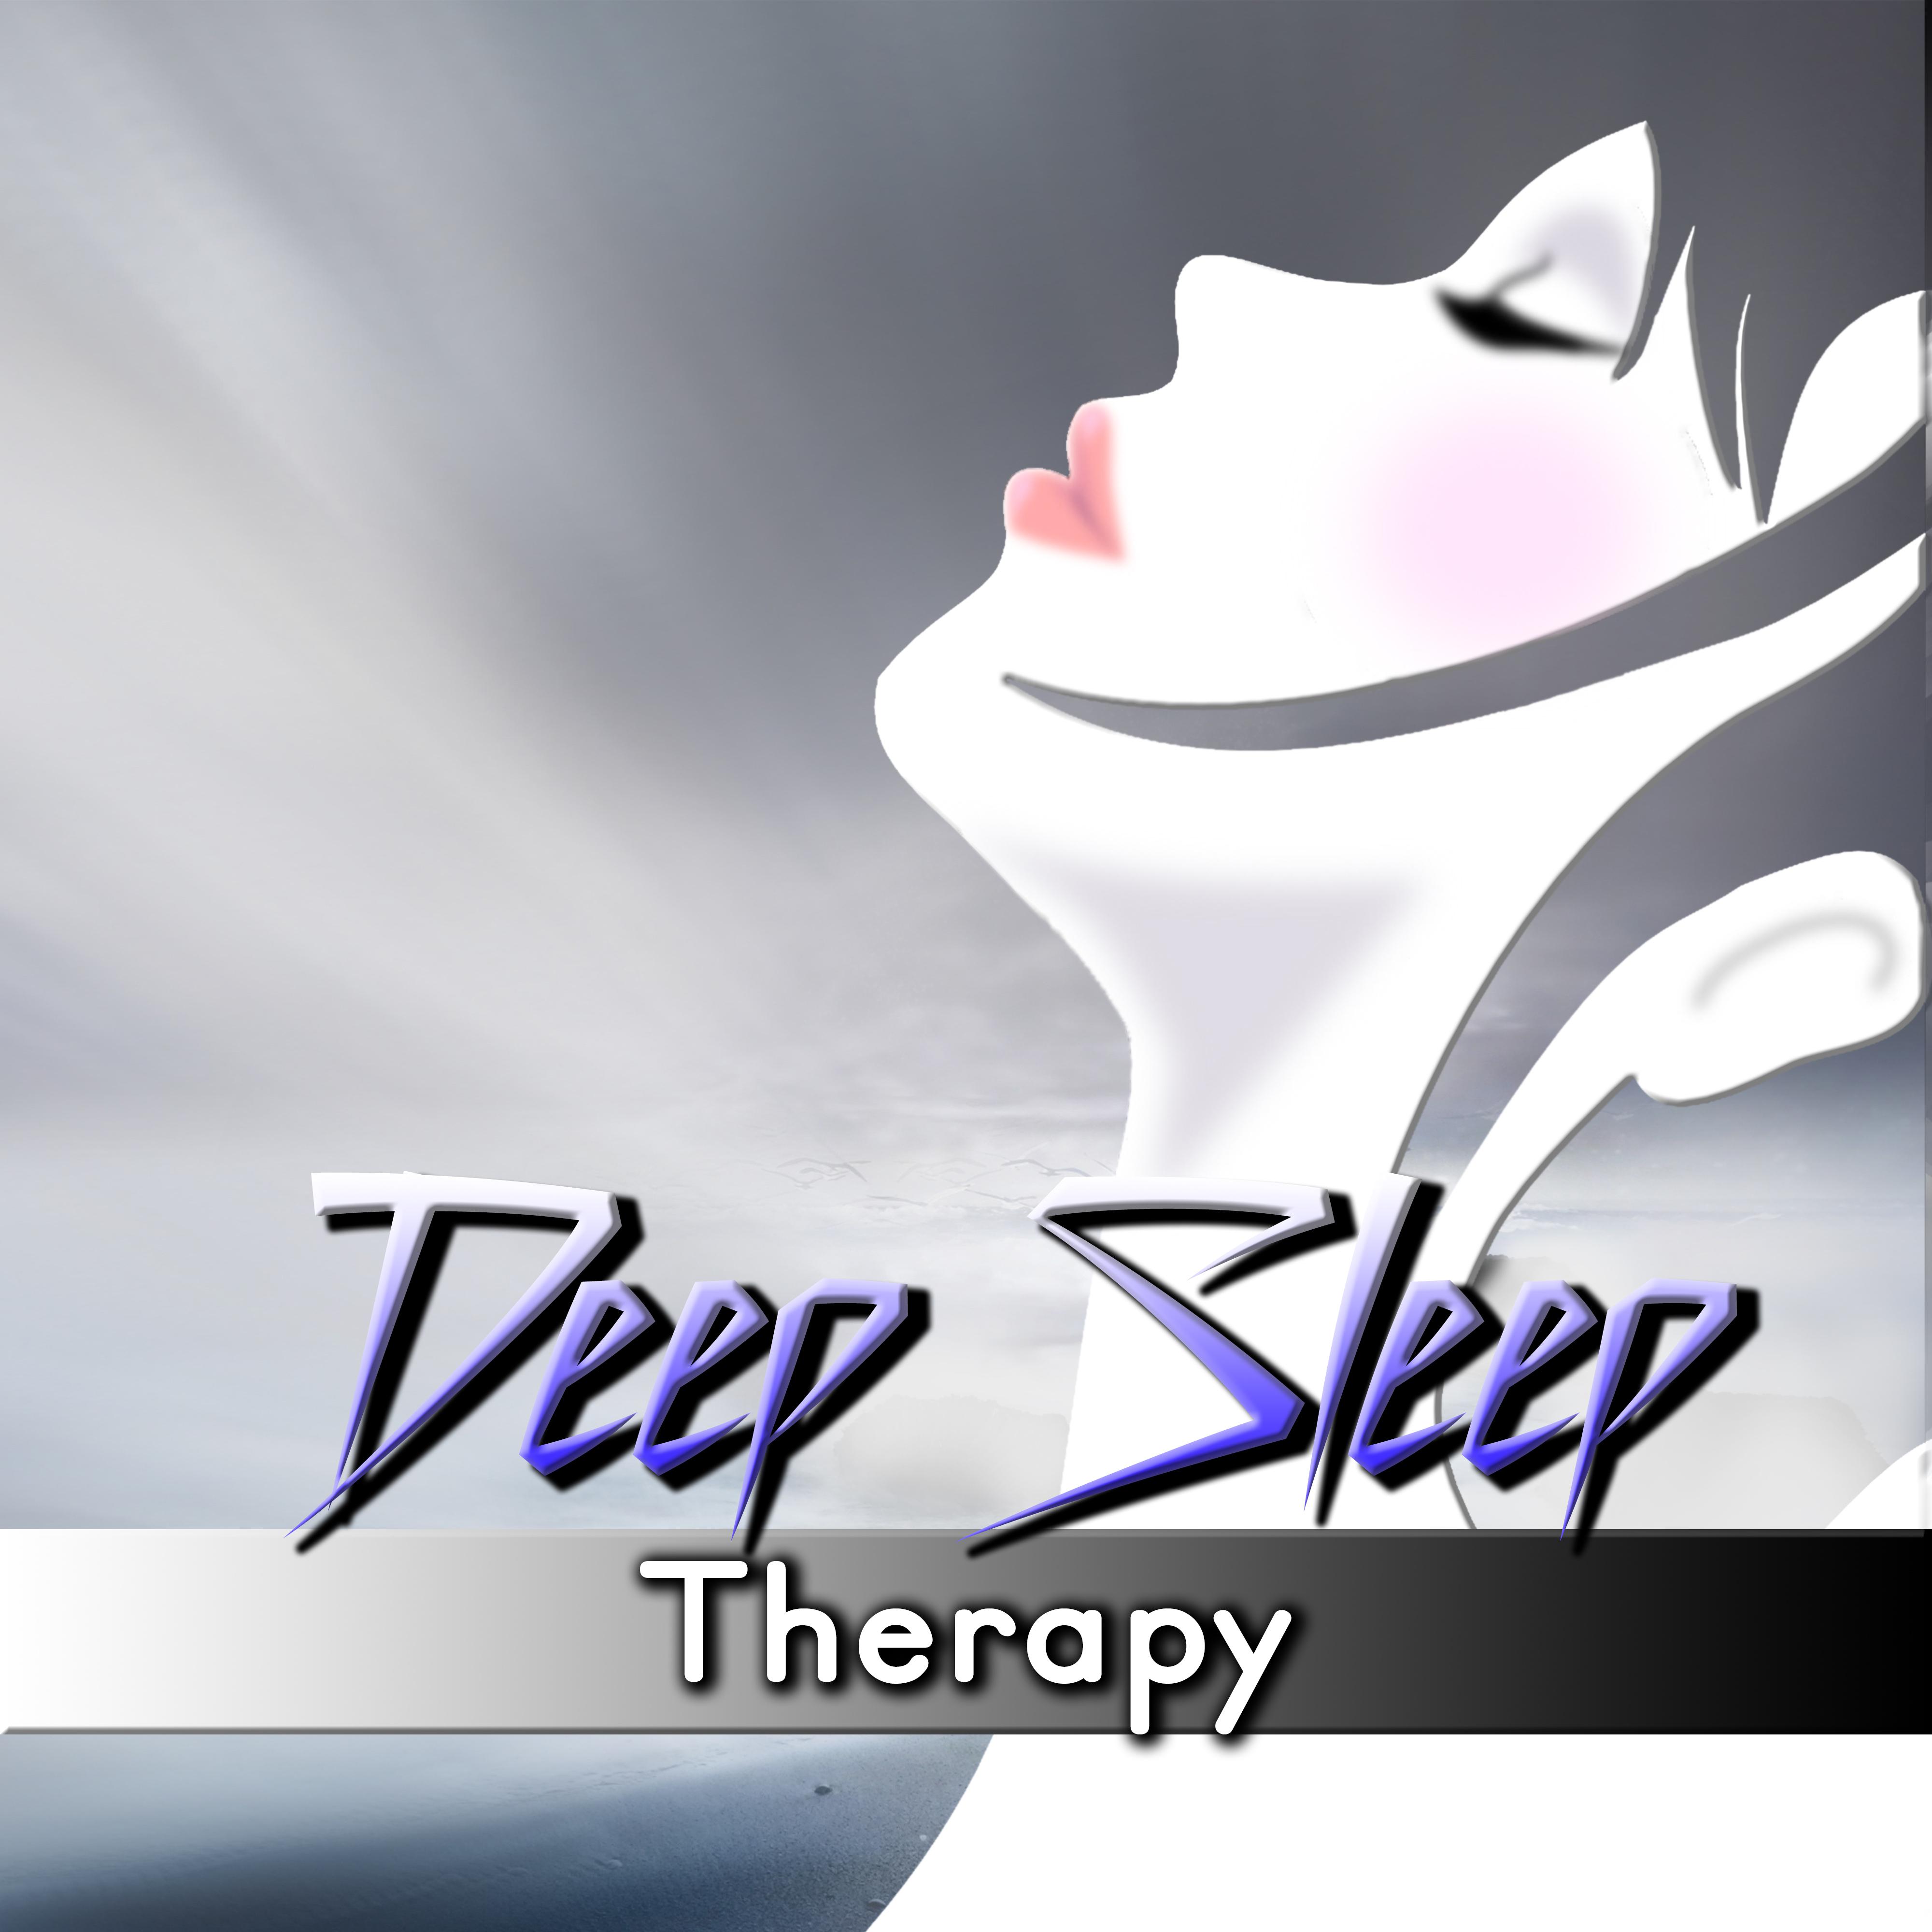 Deep Sleep Therapy – Soothing and Relaxing Music for Sleeping, Sweet Dreams, Natural White Noise, Peaceful Music for Insomnia